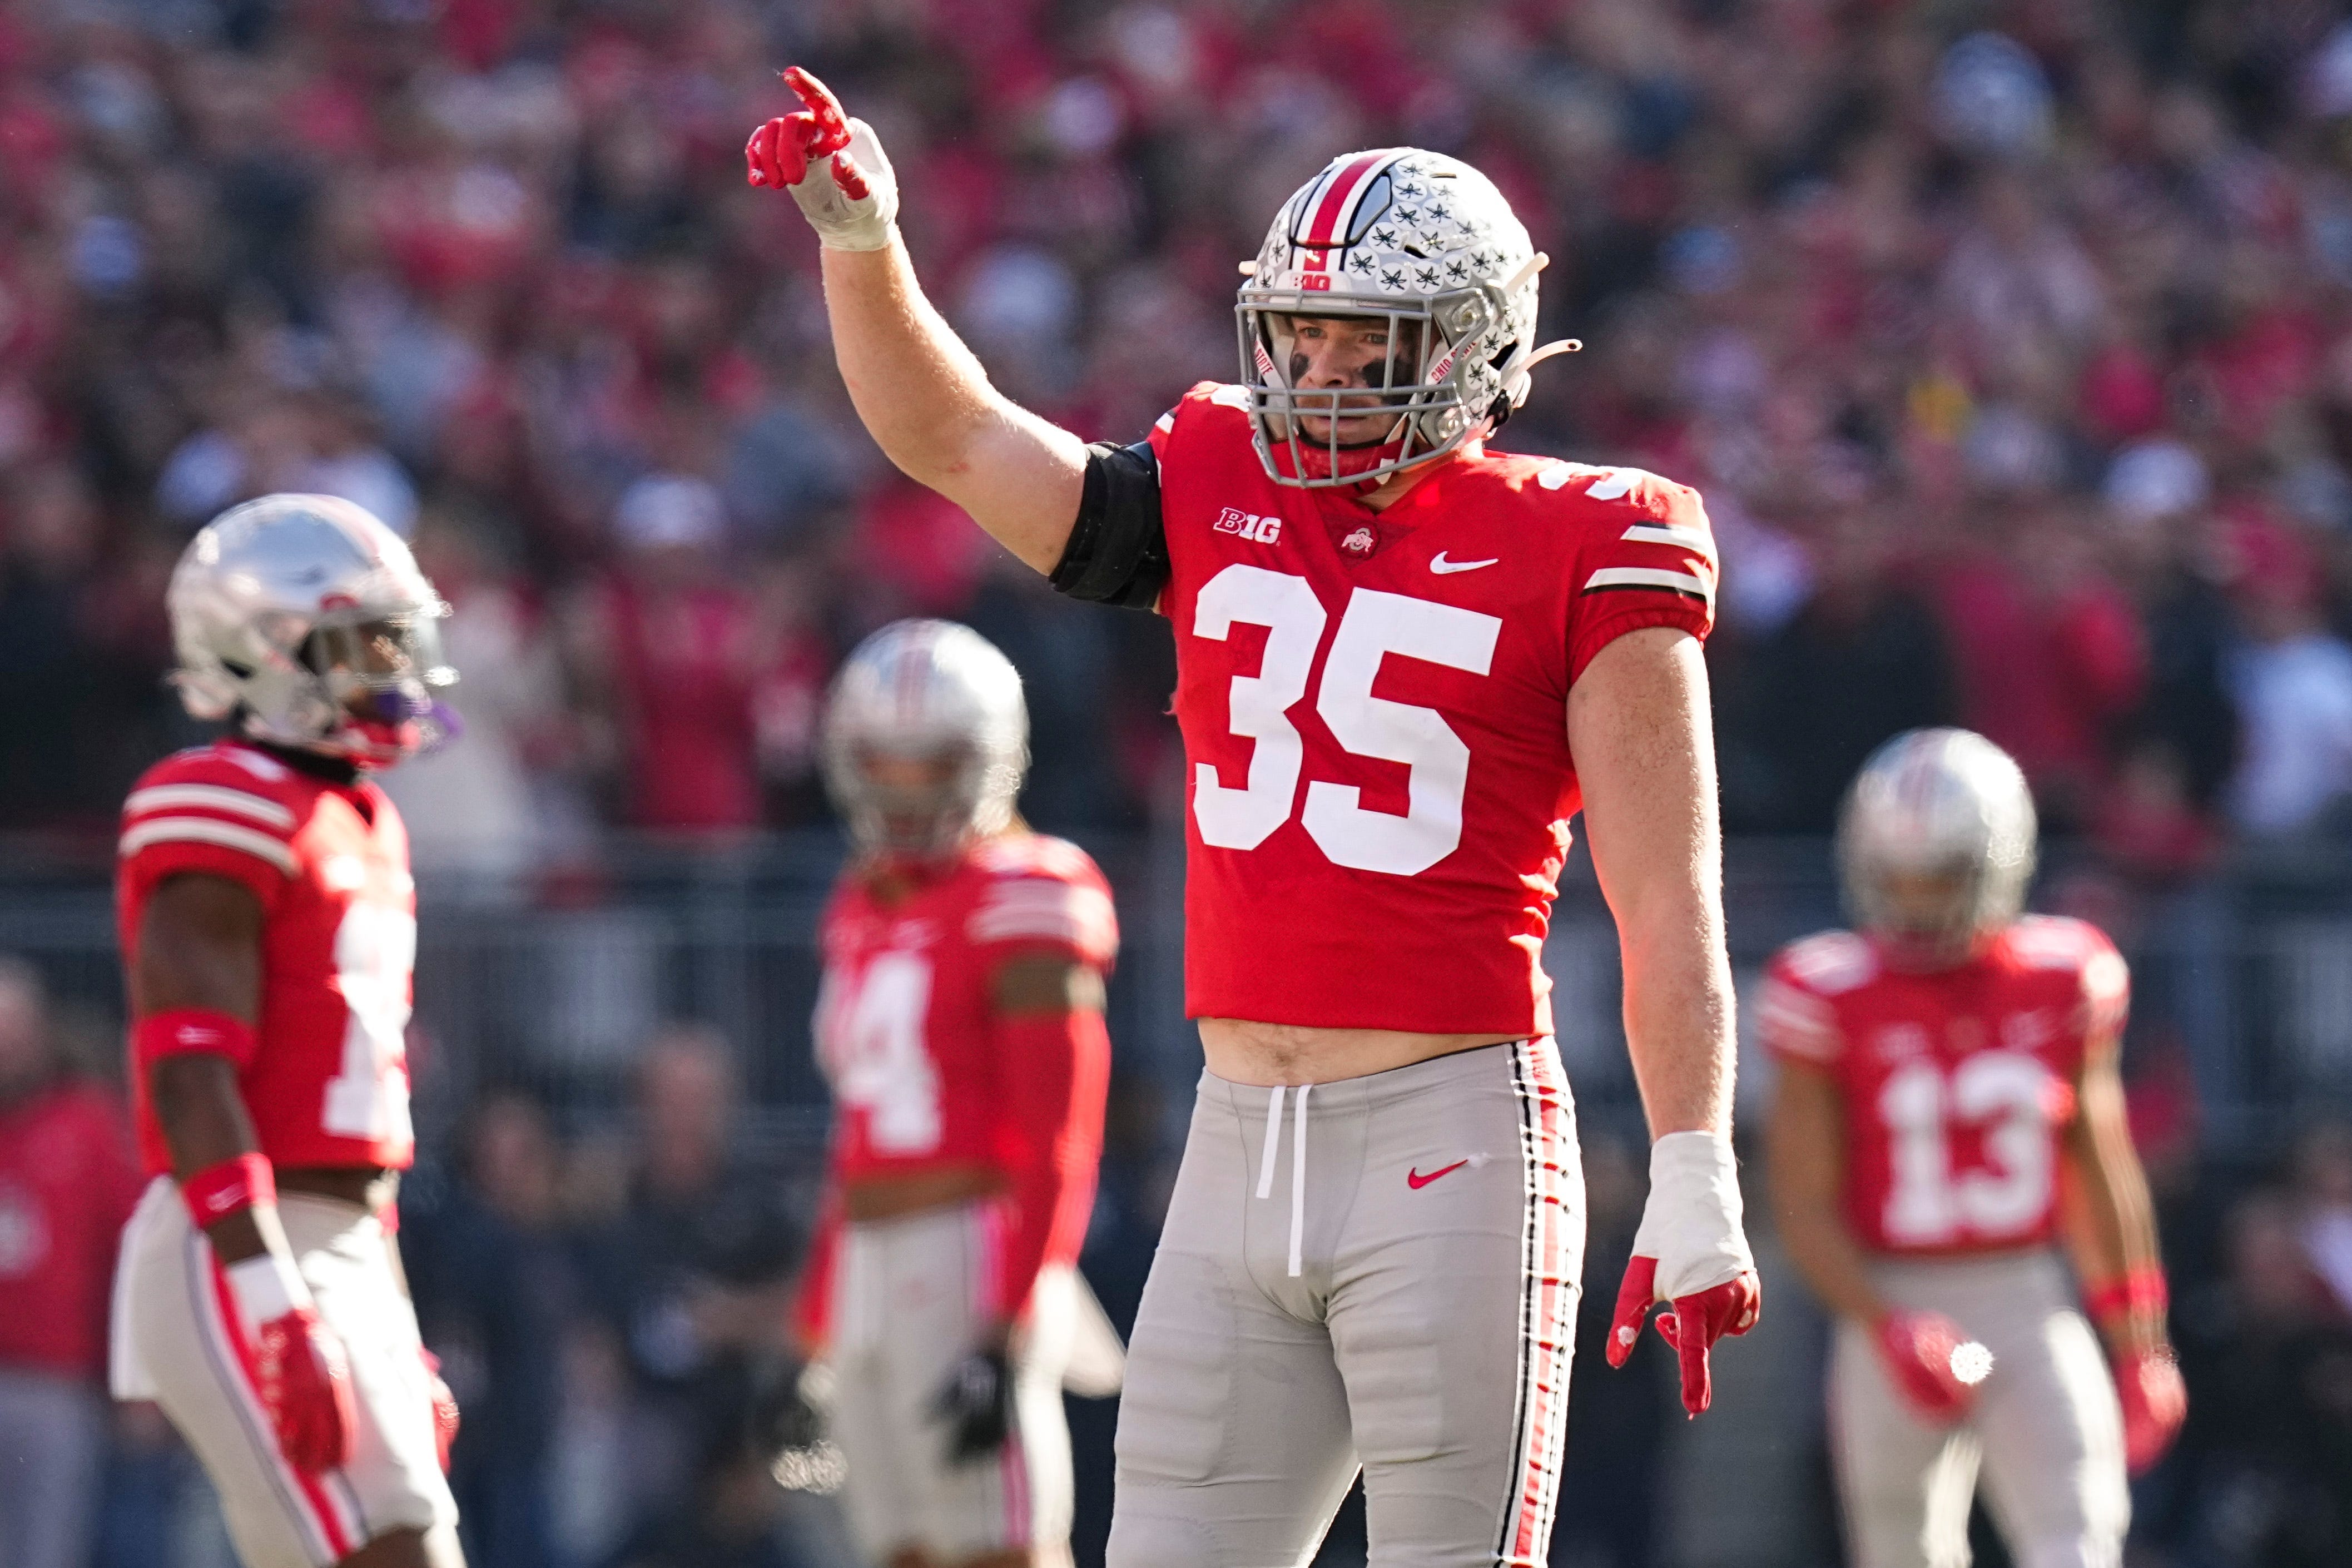 Ohio State Buckeyes linebacker Tommy Eichenberg celebrates a tackle during the first half of the NCAA football game against the Michigan Wolverines at Ohio Stadium.